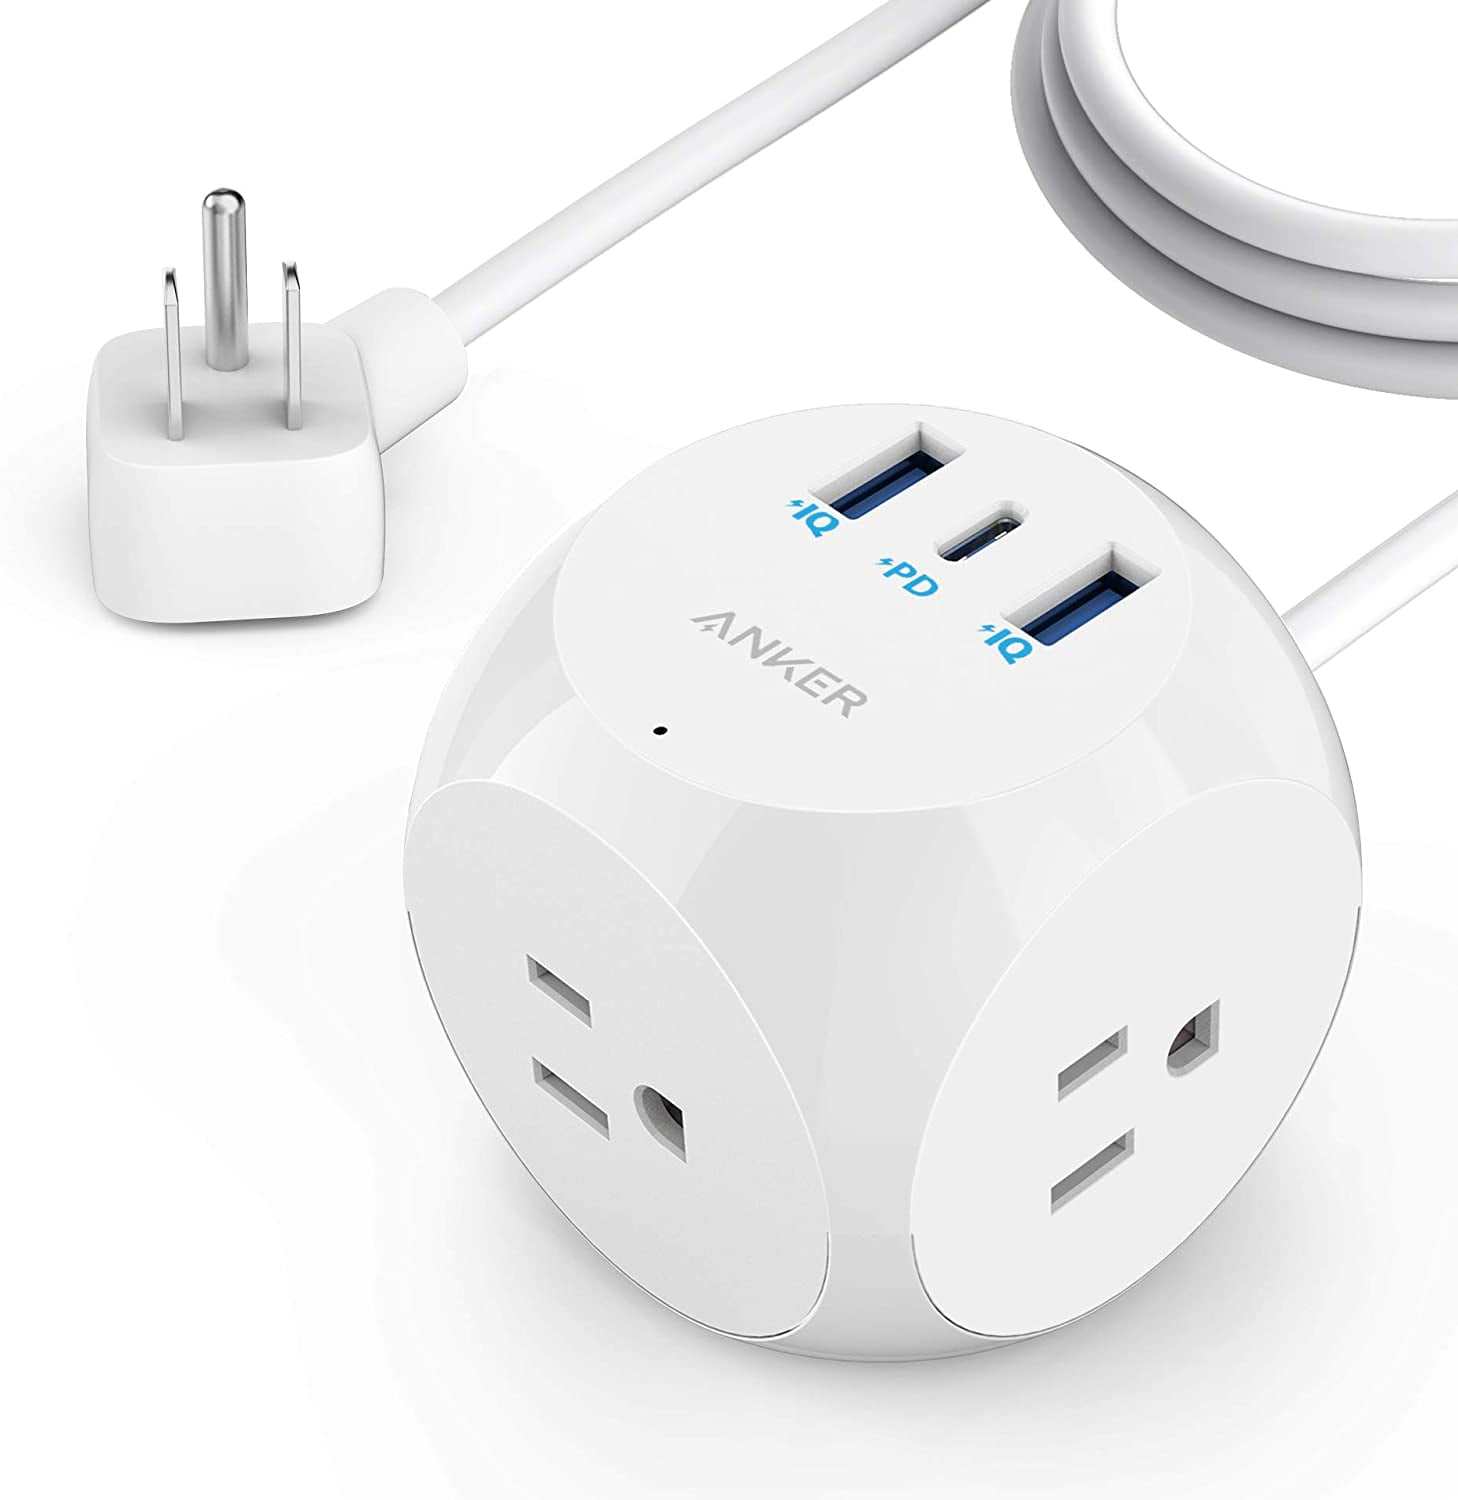 Cube Power Strip Compact Travel Portable 3 Outlet 3 Smart USB Charging Ports 